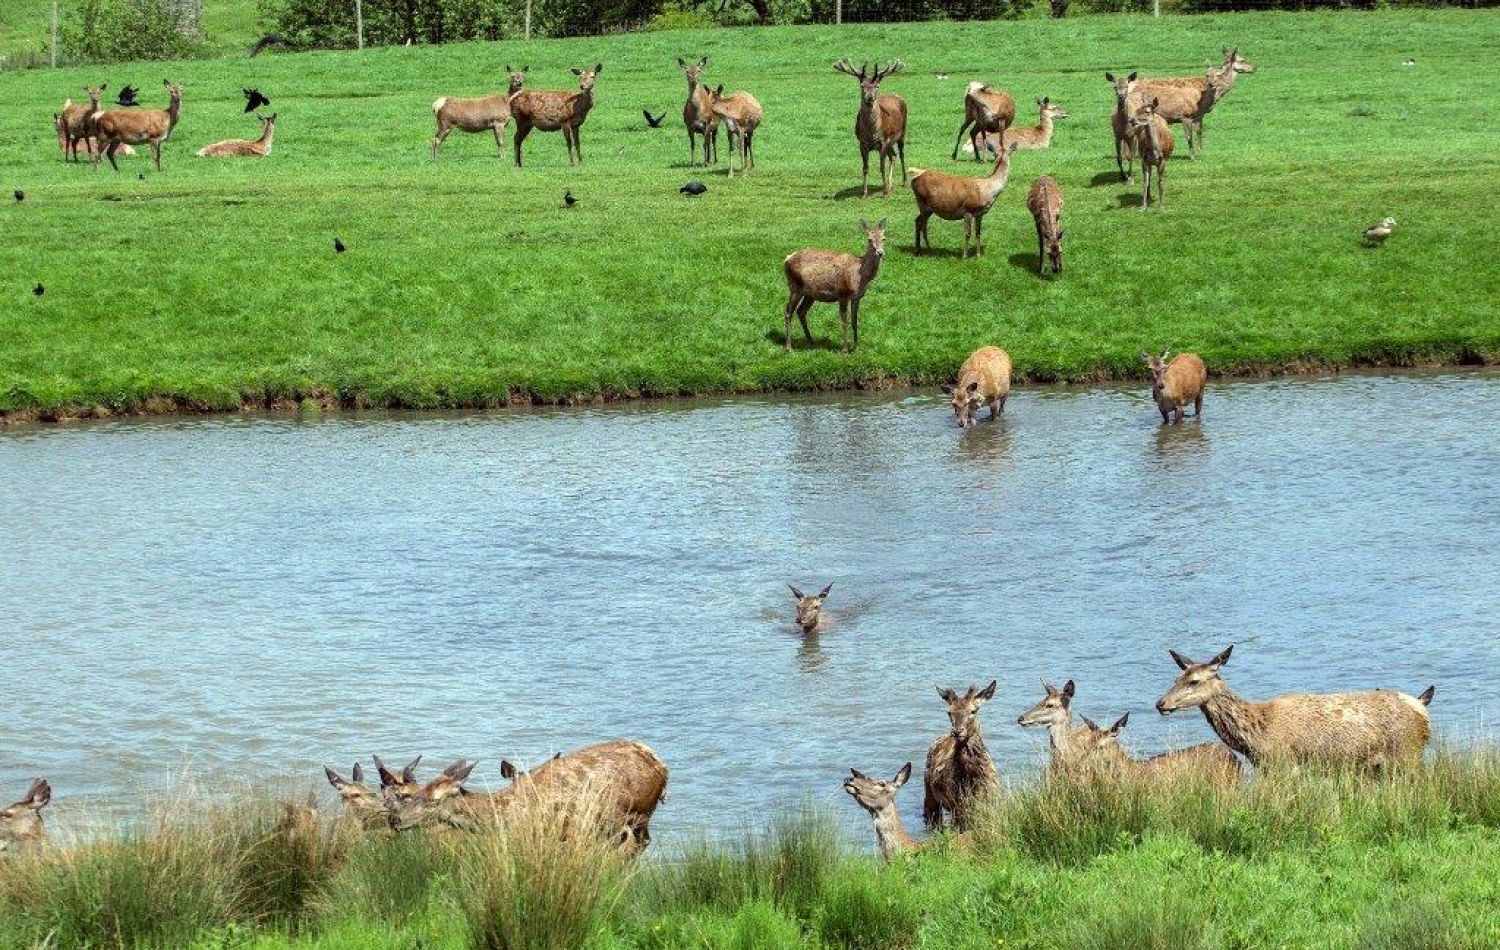 deer surrounding a river with some wading and swimming through it